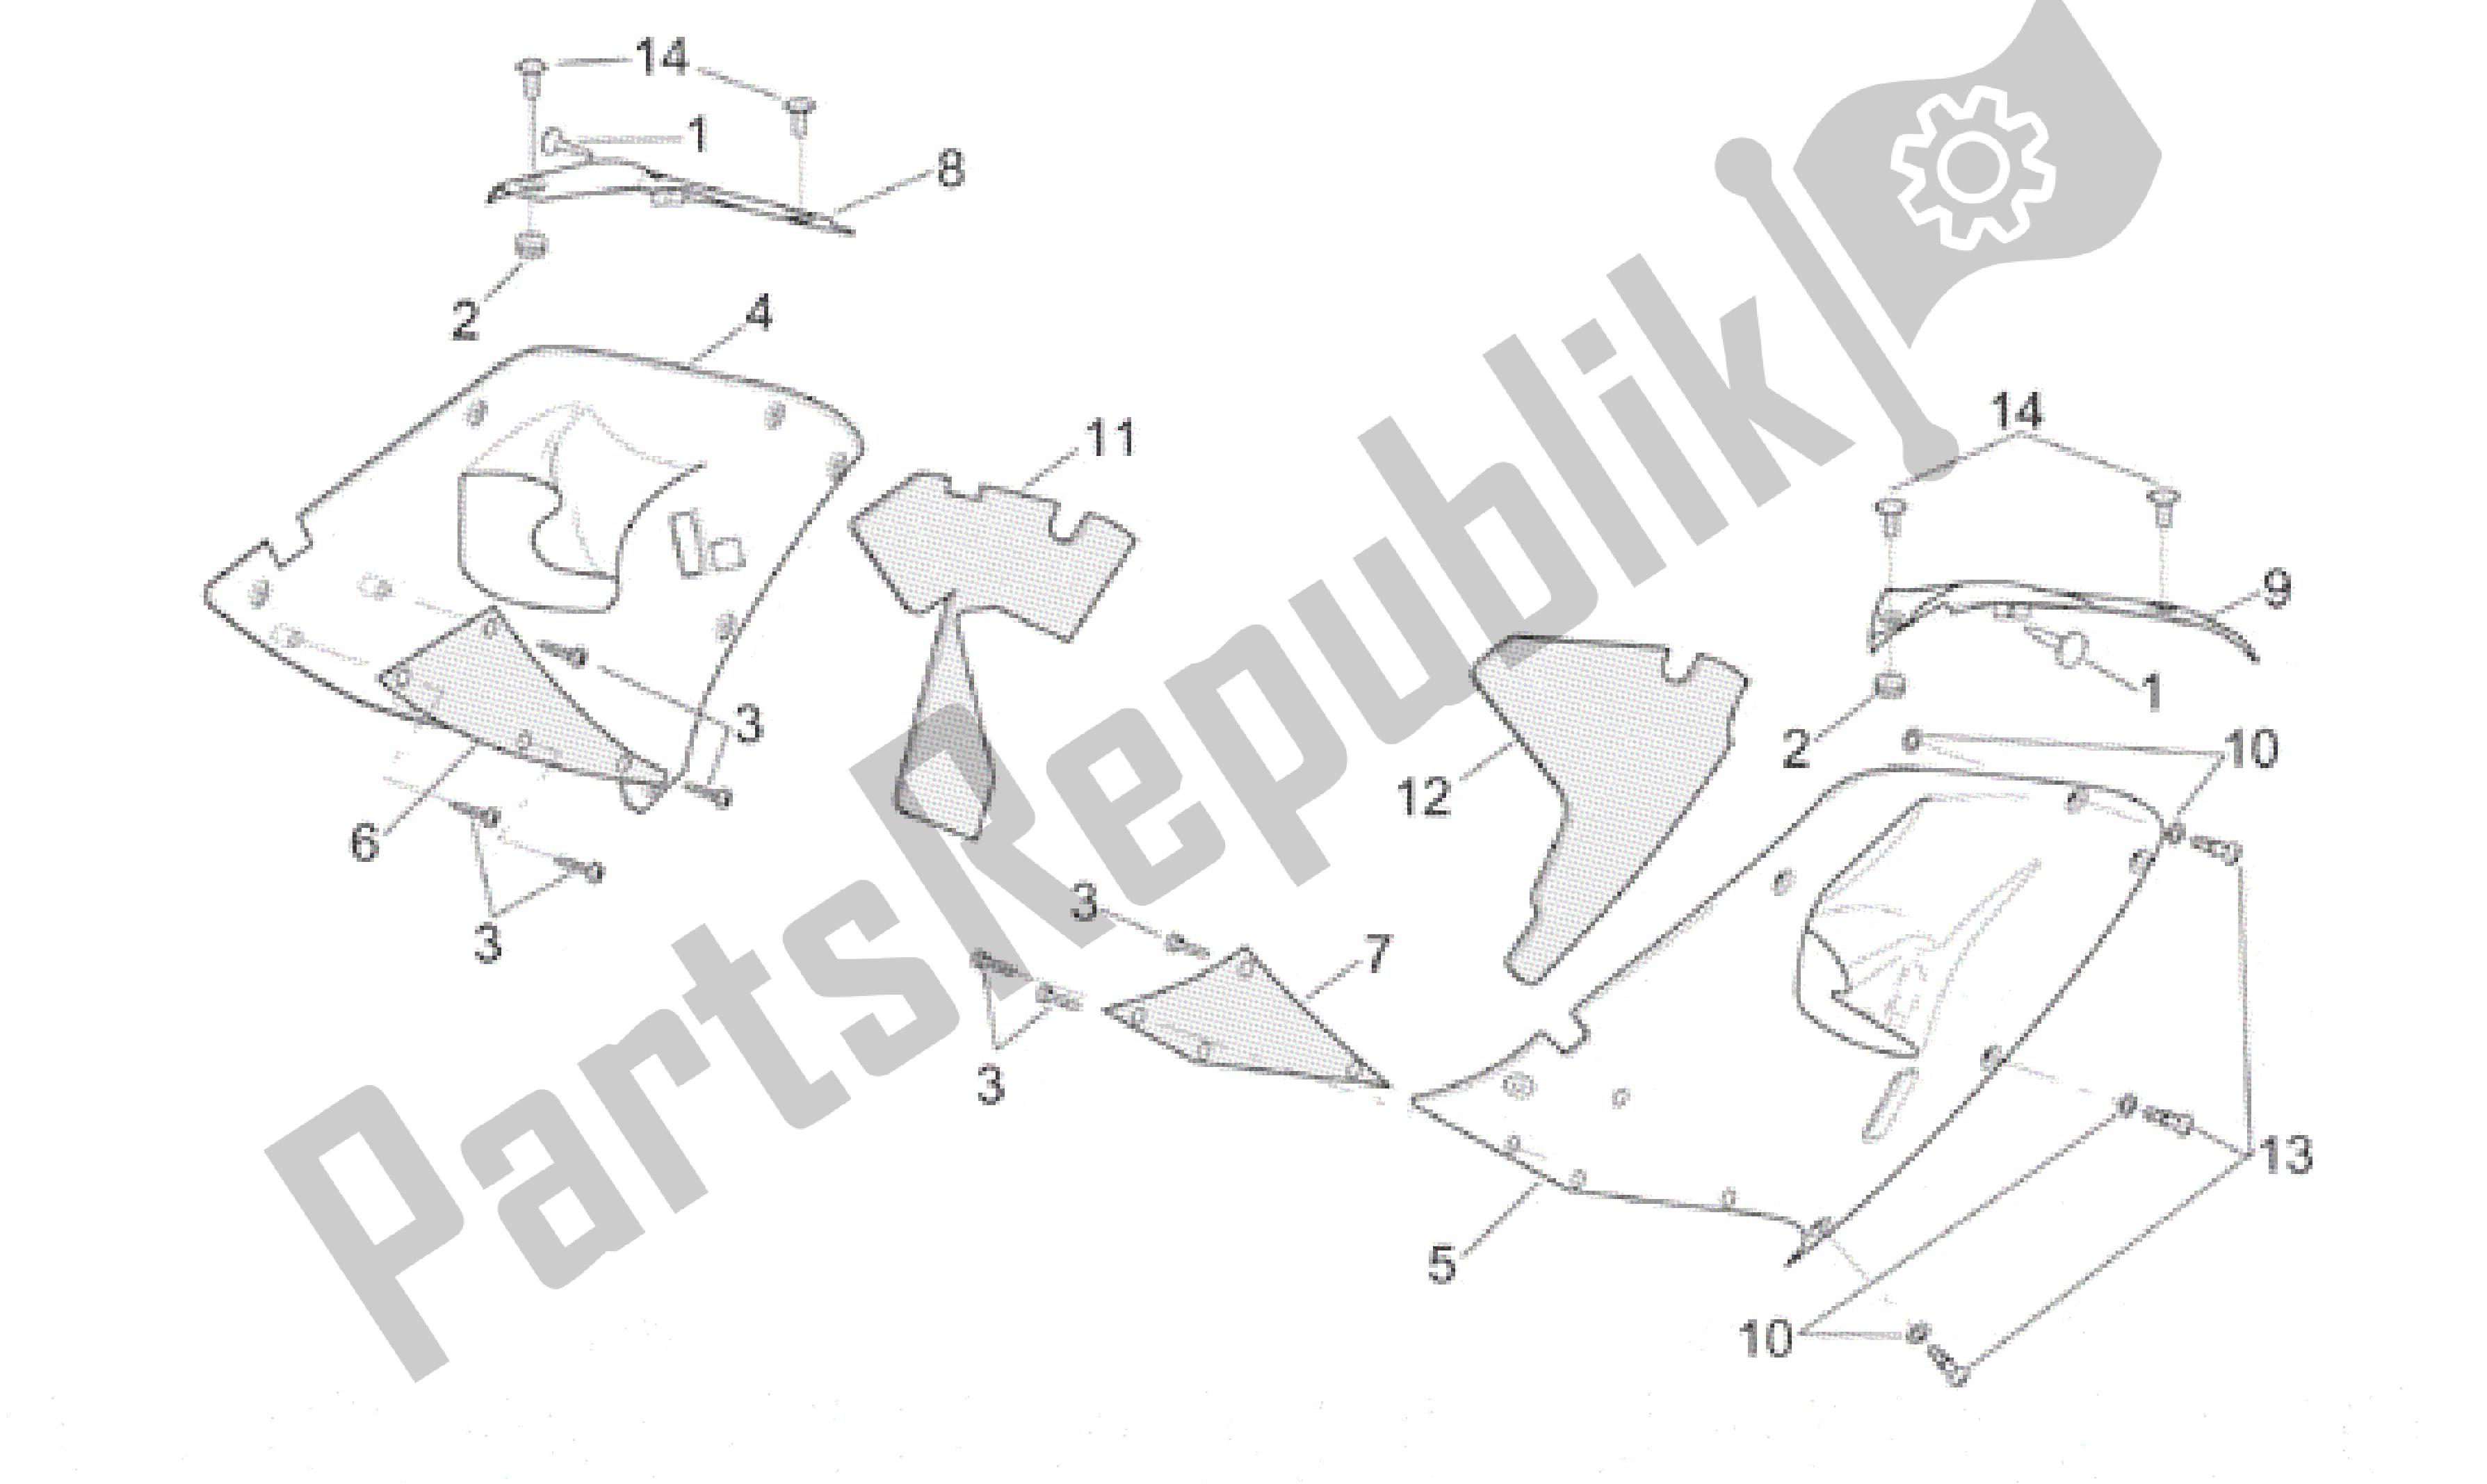 All parts for the Central Body - Upper Fairings of the Aprilia RSV Mille R 3901 1000 2001 - 2002